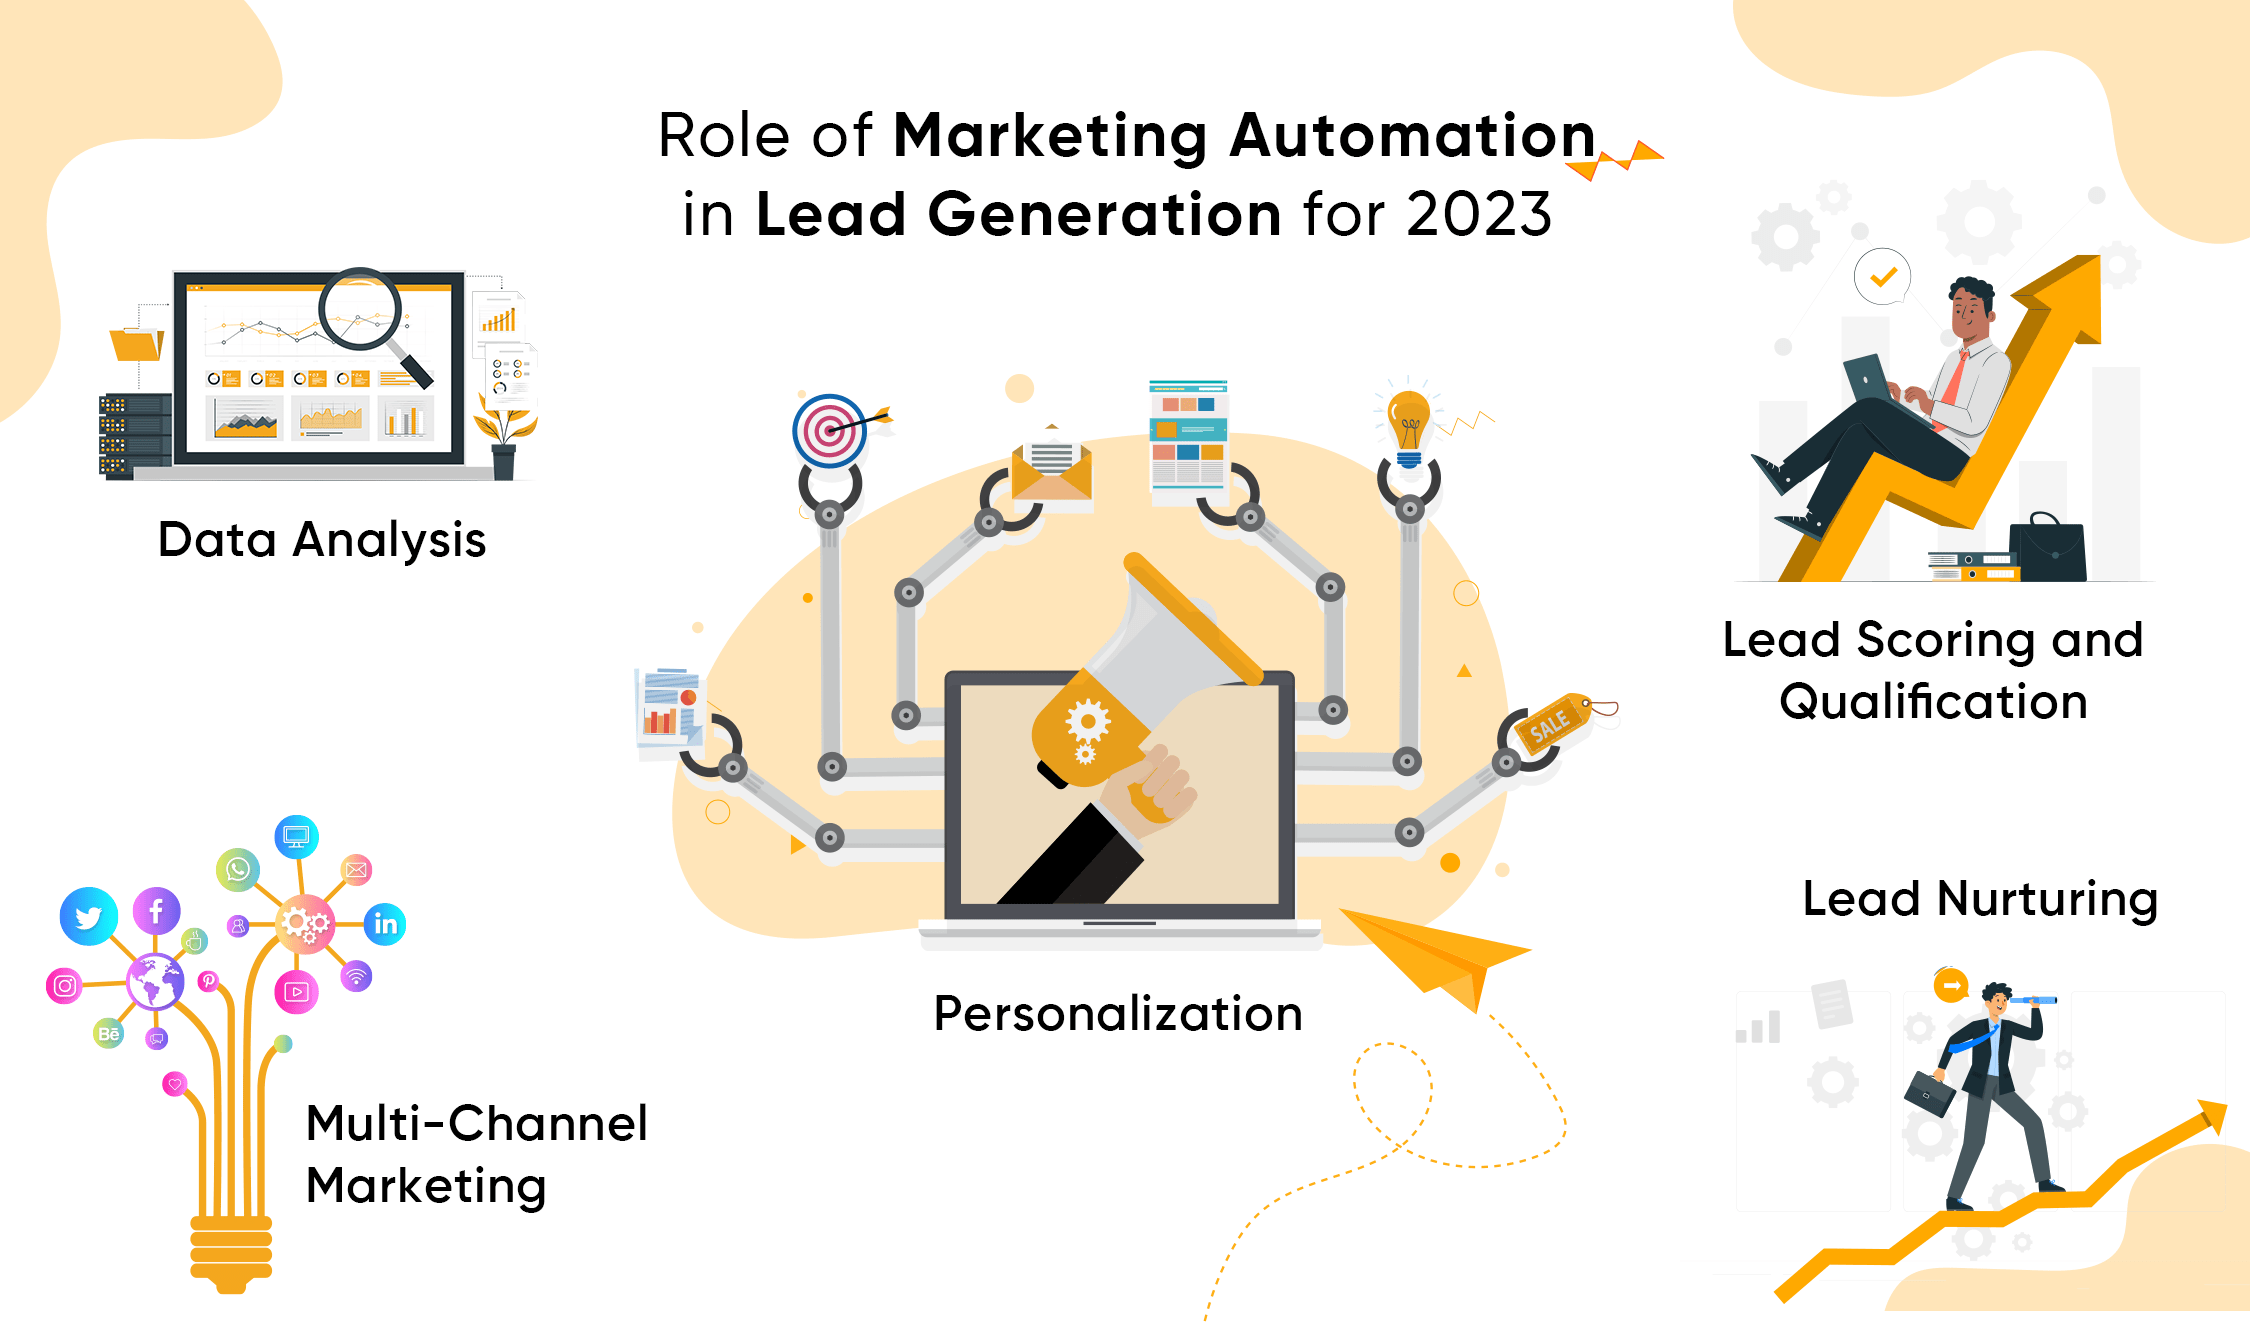 Role of Marketing Automation in Lead Generation for 2023